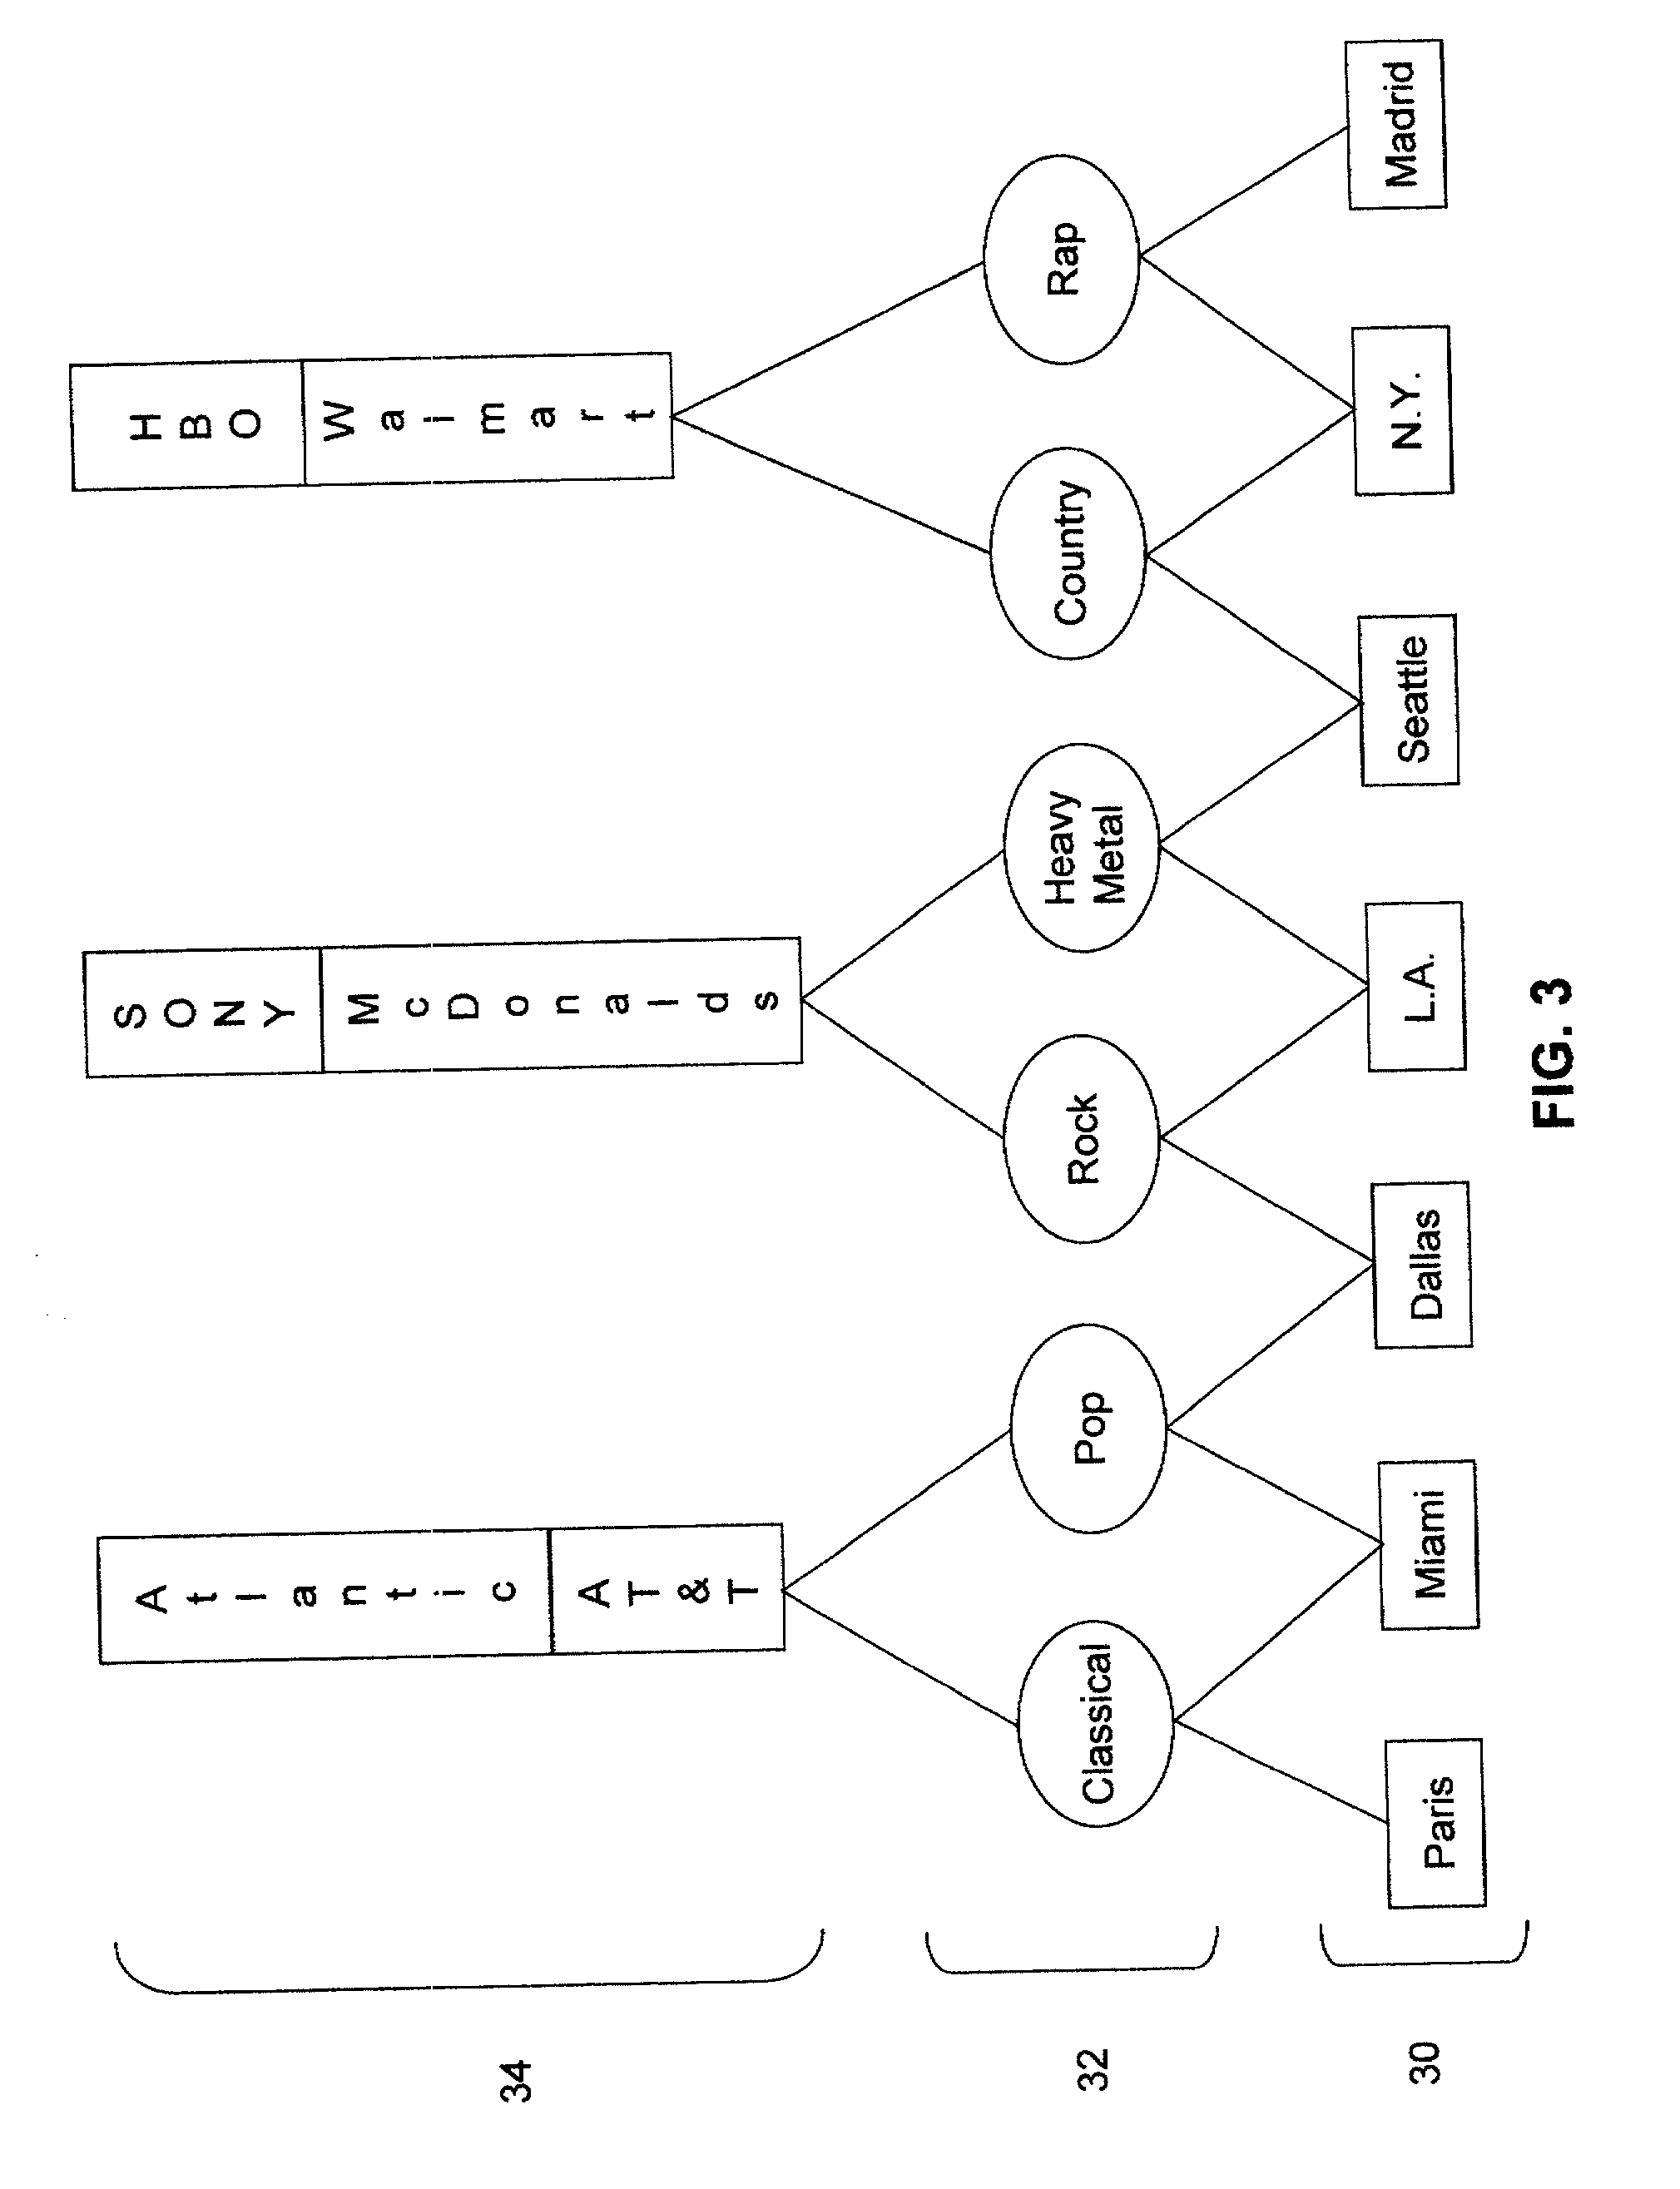 Method of and apparatus for delivery of proprietary audio and visual works to purchaser electronic devices